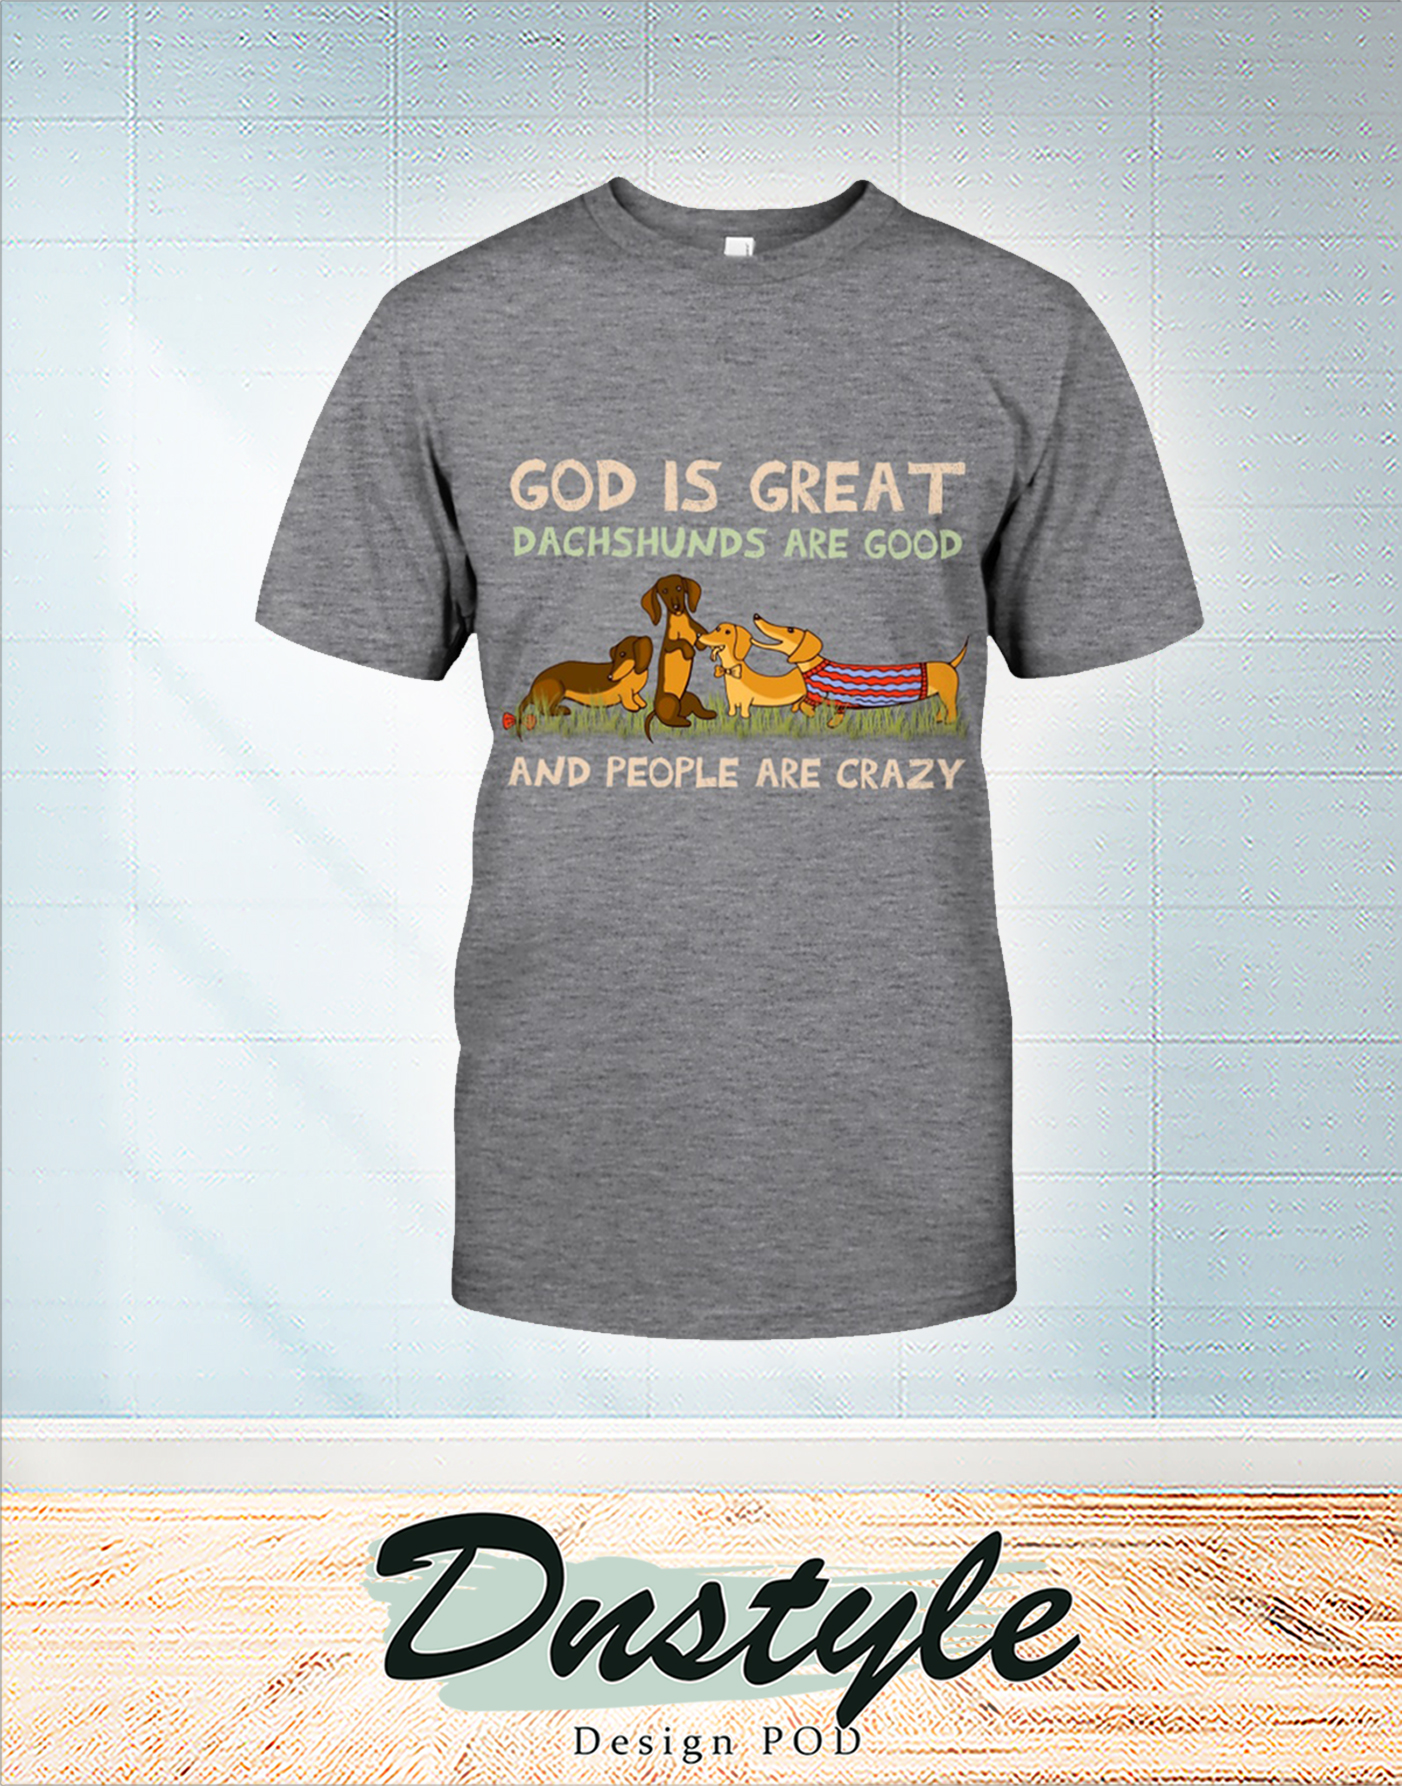 God is great dachshunds are good and people are crazy shirt